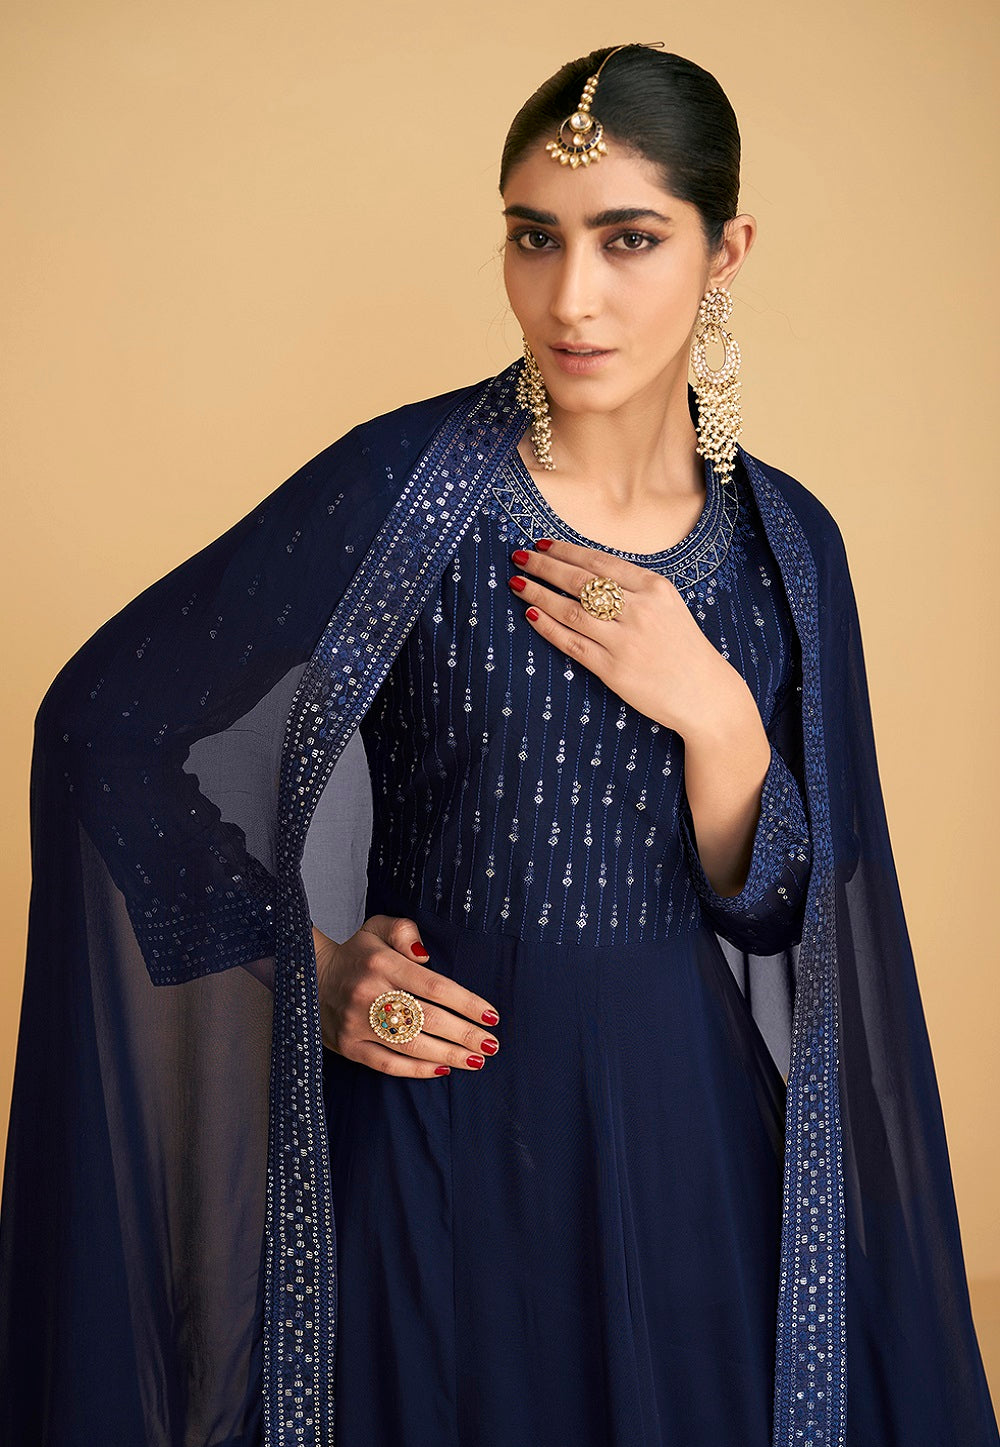 Embroidered Georgette Abaya Style Suit in Navy Blue